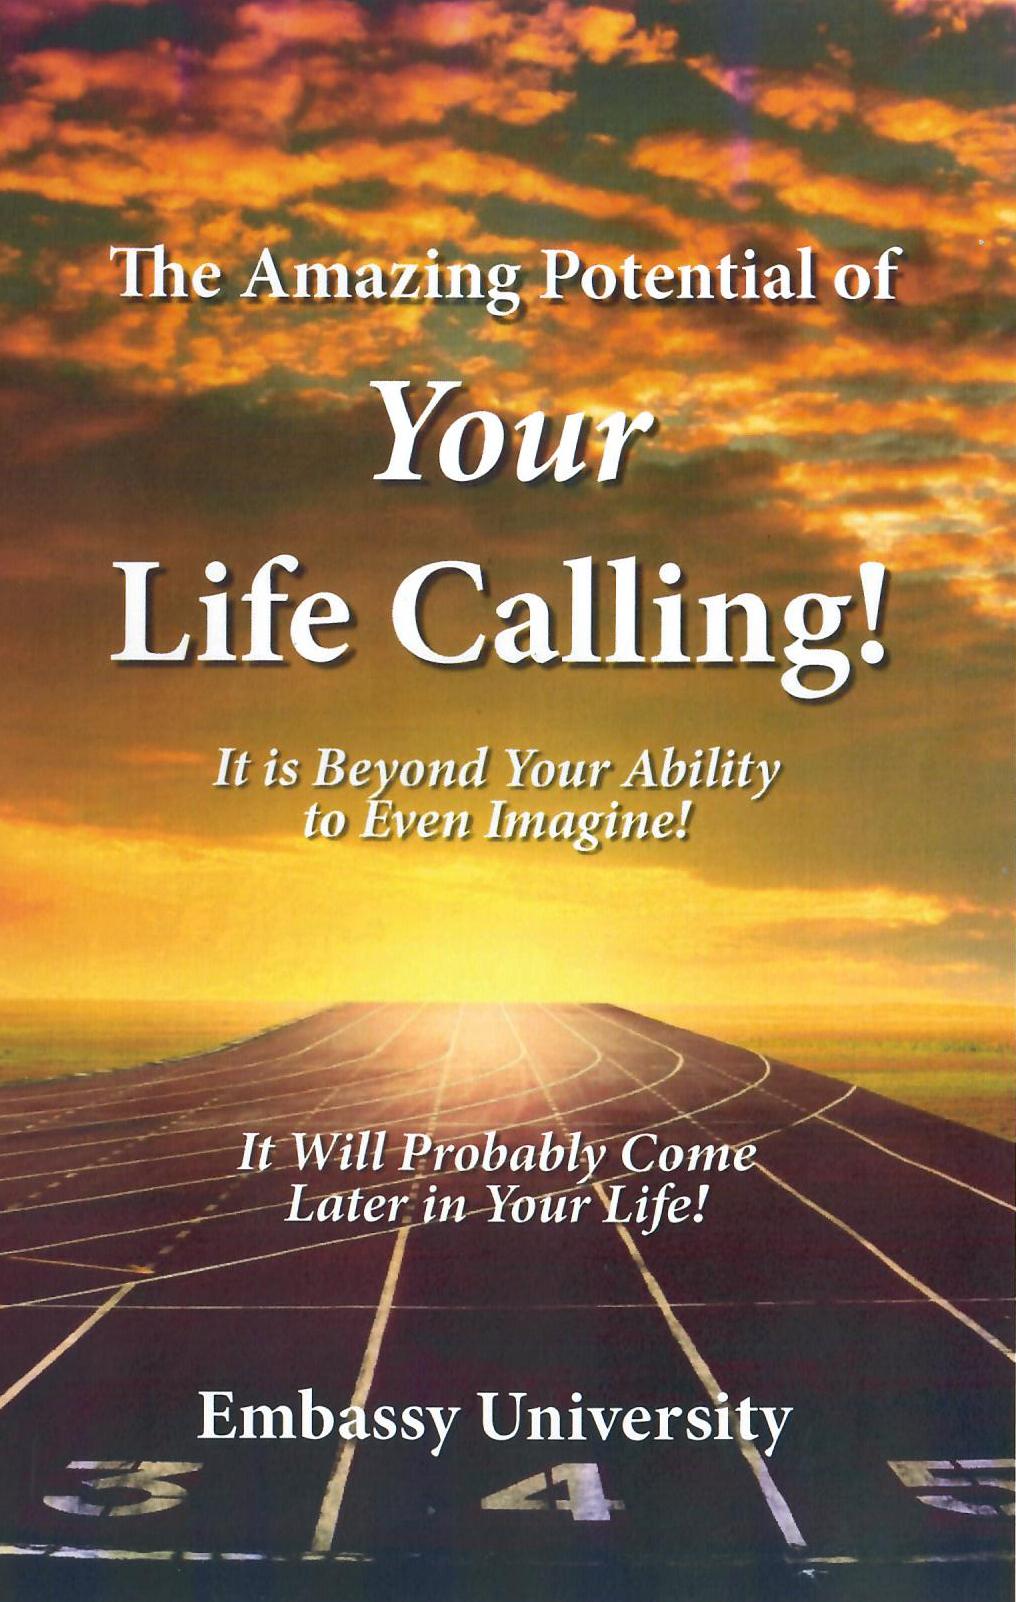 The Amazing Potential of Your Life Calling!